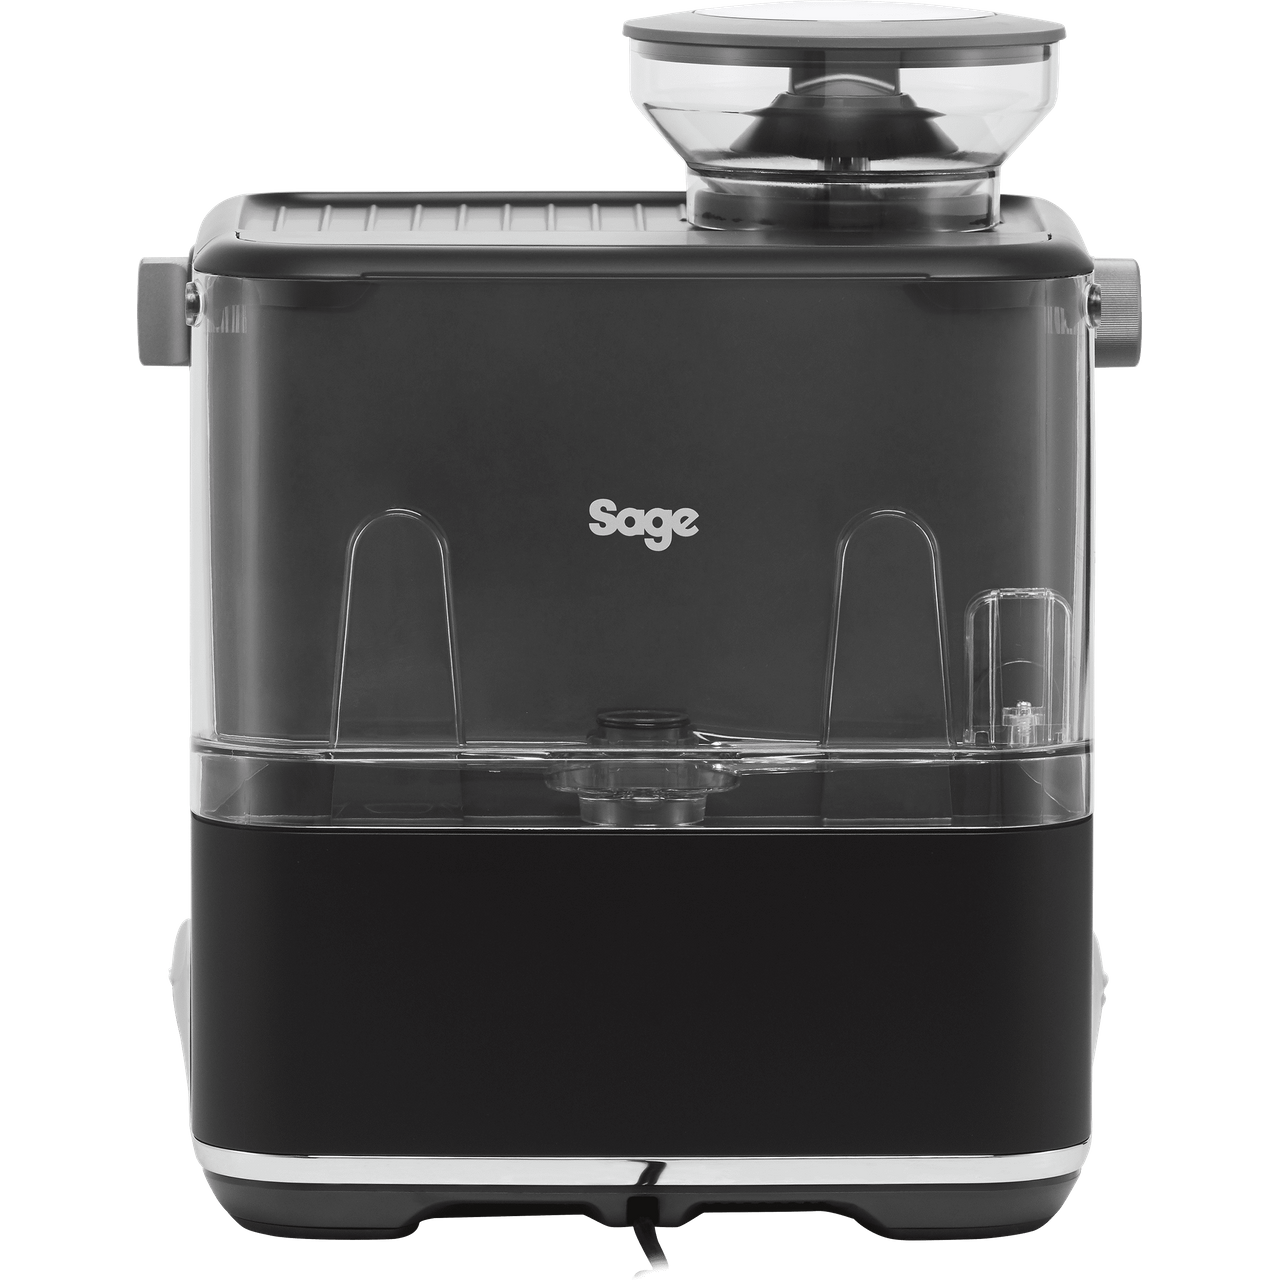 Sage Barista Pro Bean to Cup Coffee Machine in Black Stainless Steel, –  Xtra Wholsesale Ltd